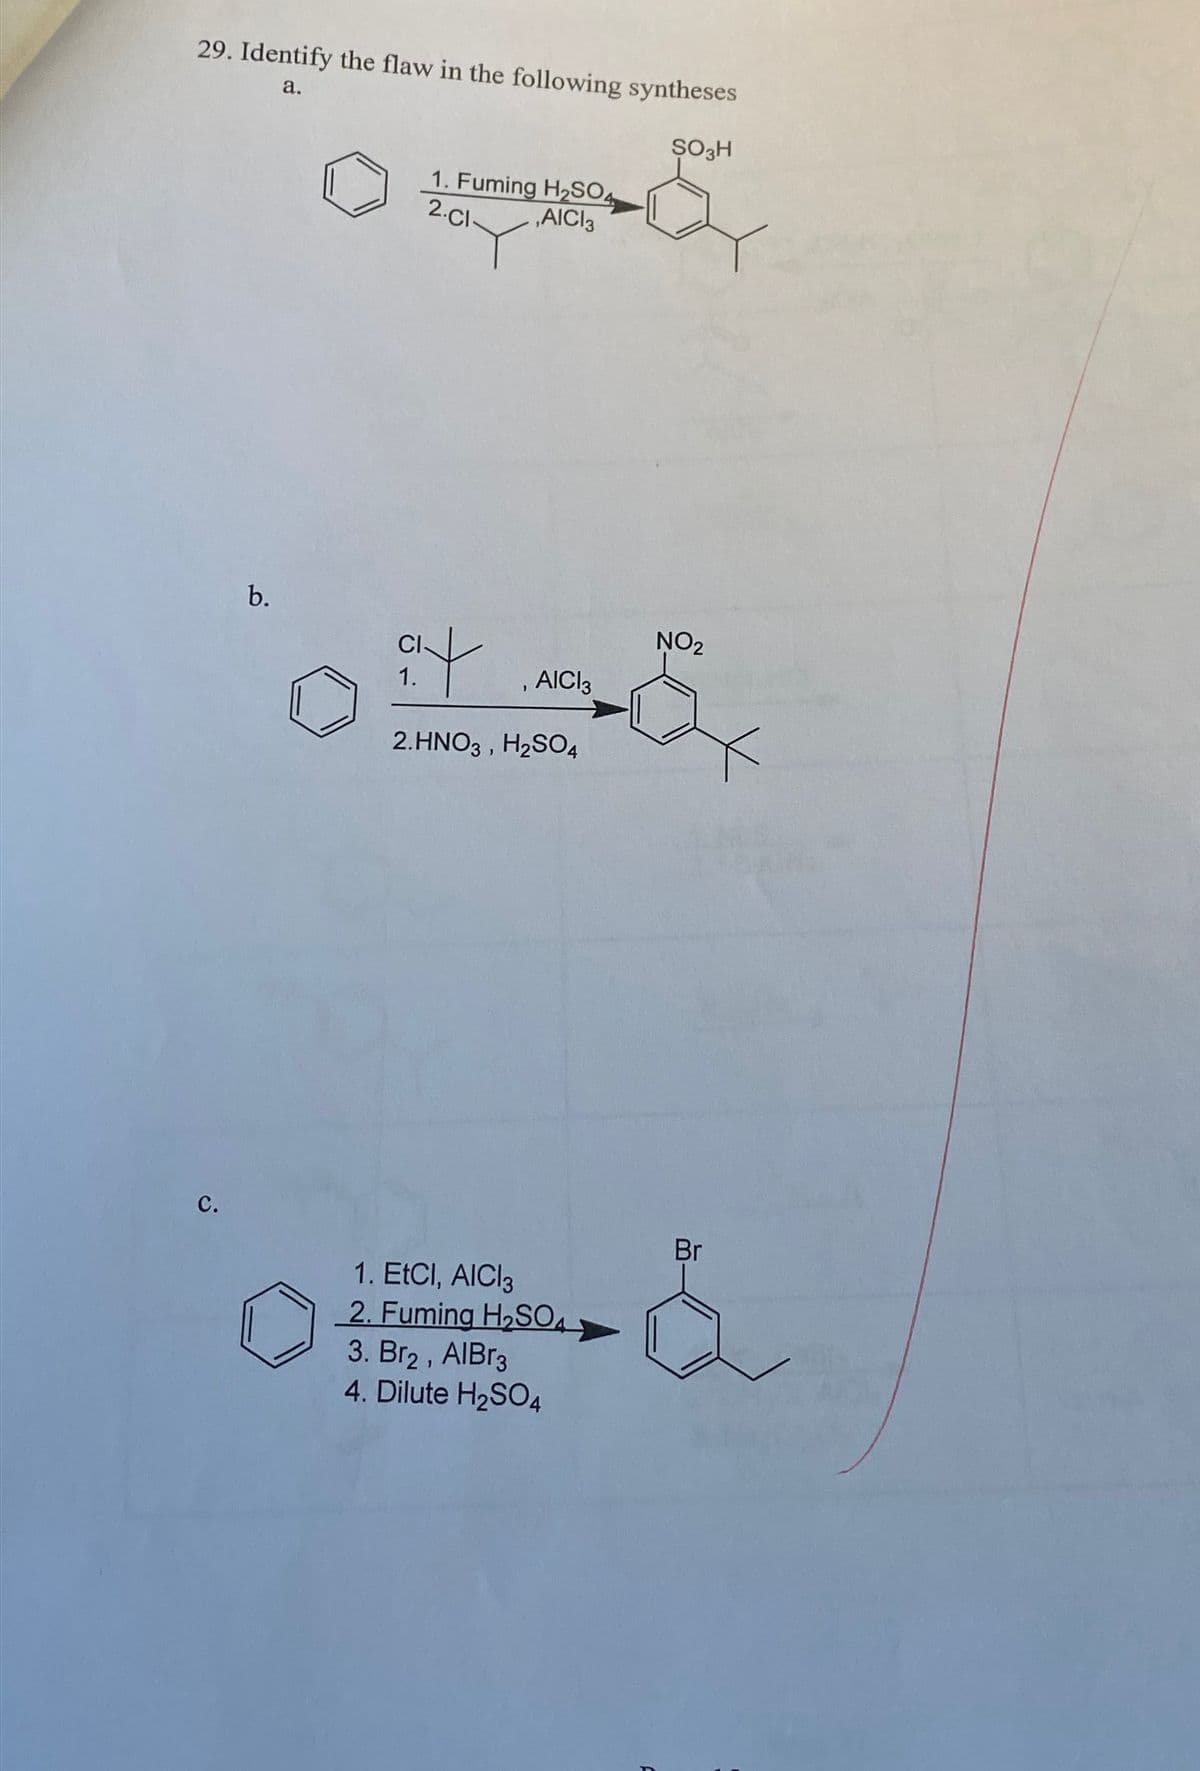 29. Identify the flaw in the following syntheses
a.
SO3H
C&
1. Fuming H2SO4
2.Cl-
,AICI 3
C.
b.
at
1.
, AICI
2.HNO3, H2SO4
NO2
1. EtCI, AICI 3
2. Fuming H2₂SO
3. Br2, AIBг3
4. Dilute H2SO4
Br
&